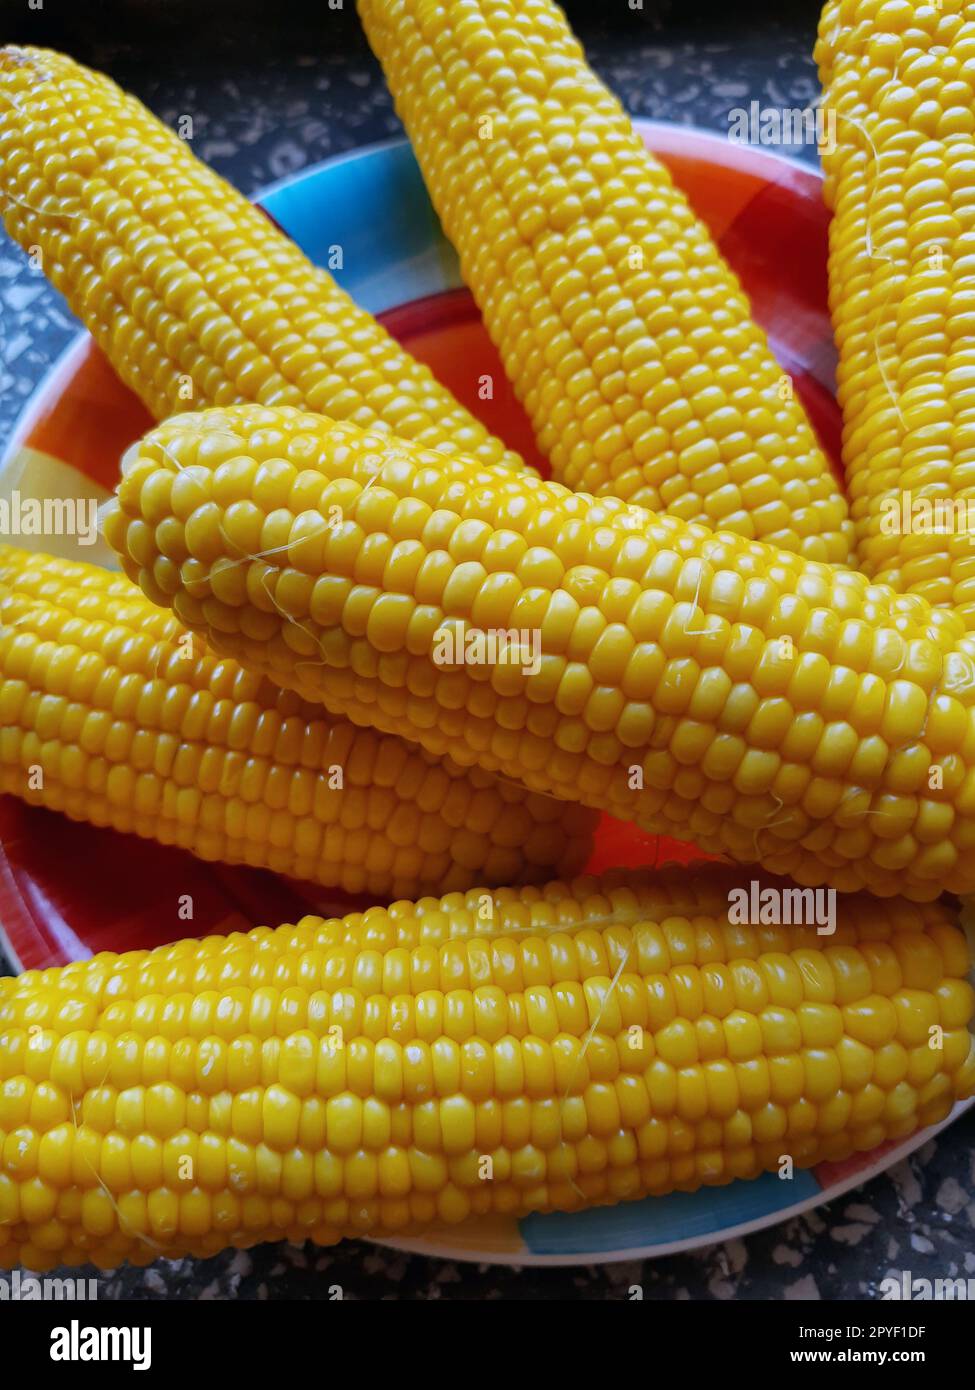 Boiled juicy corn on a plate Stock Photo